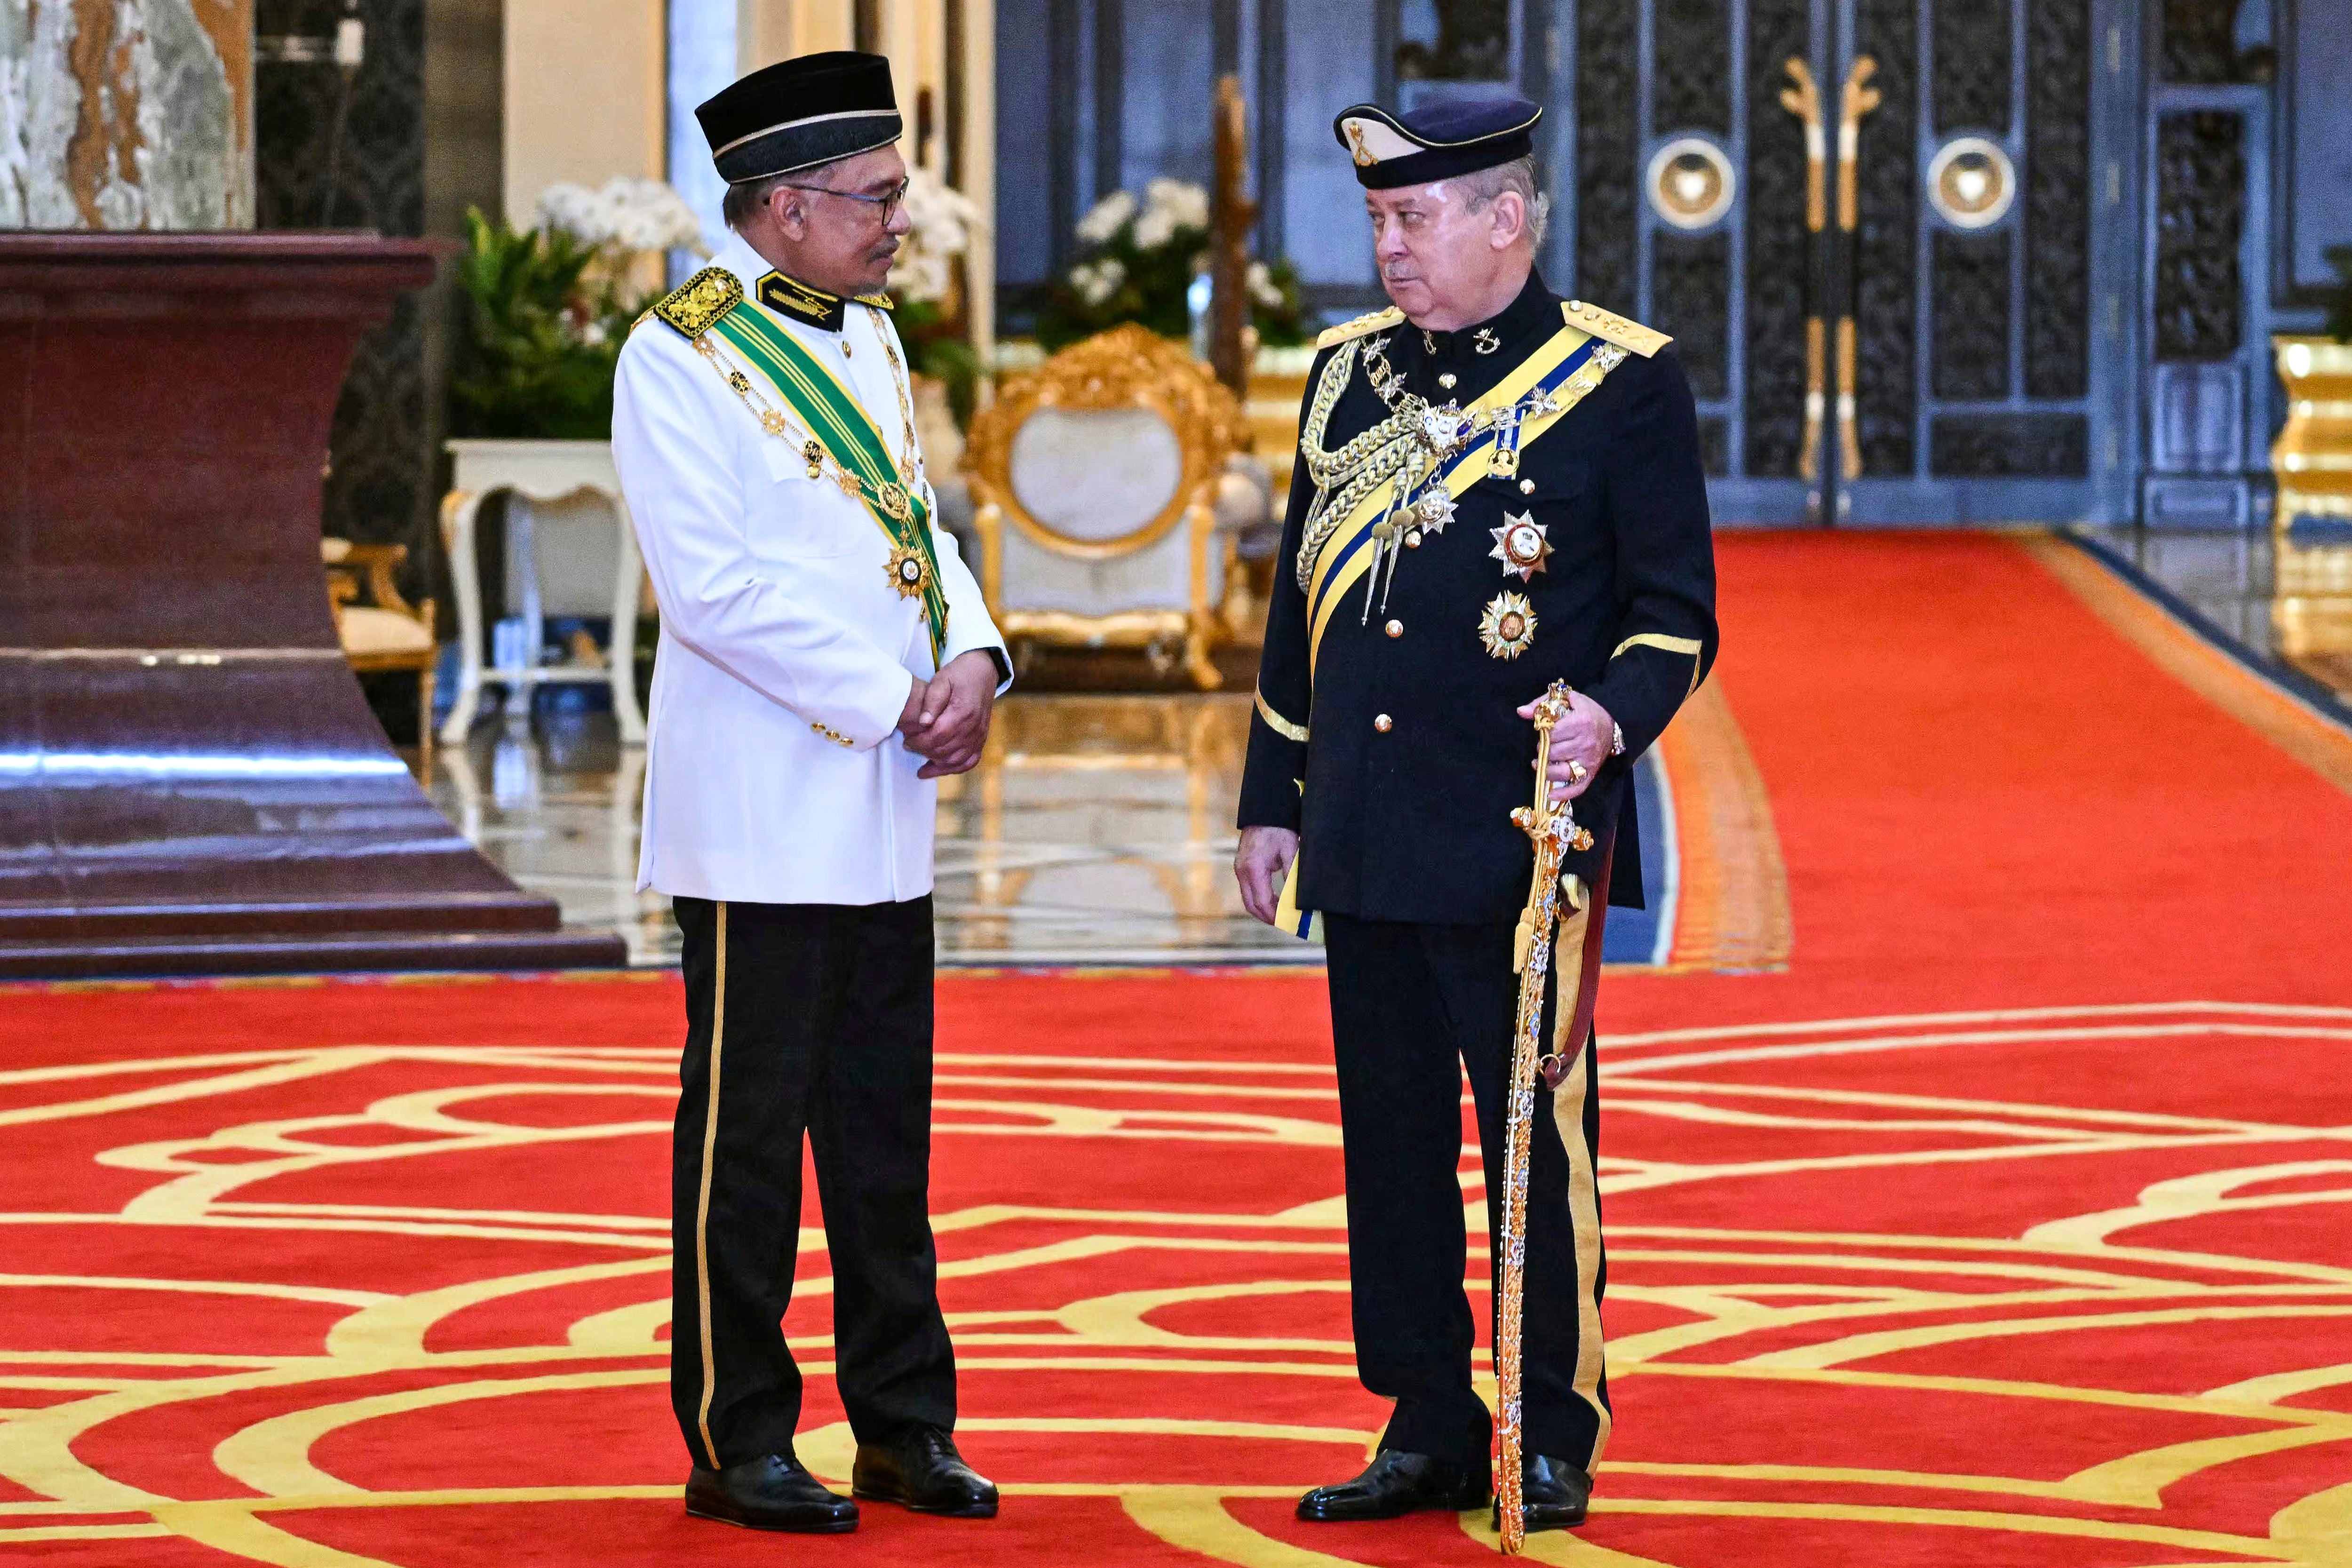 Sultan Ibrahim Iskandar is known to share close ties with prime minister Anwar Ibrahim